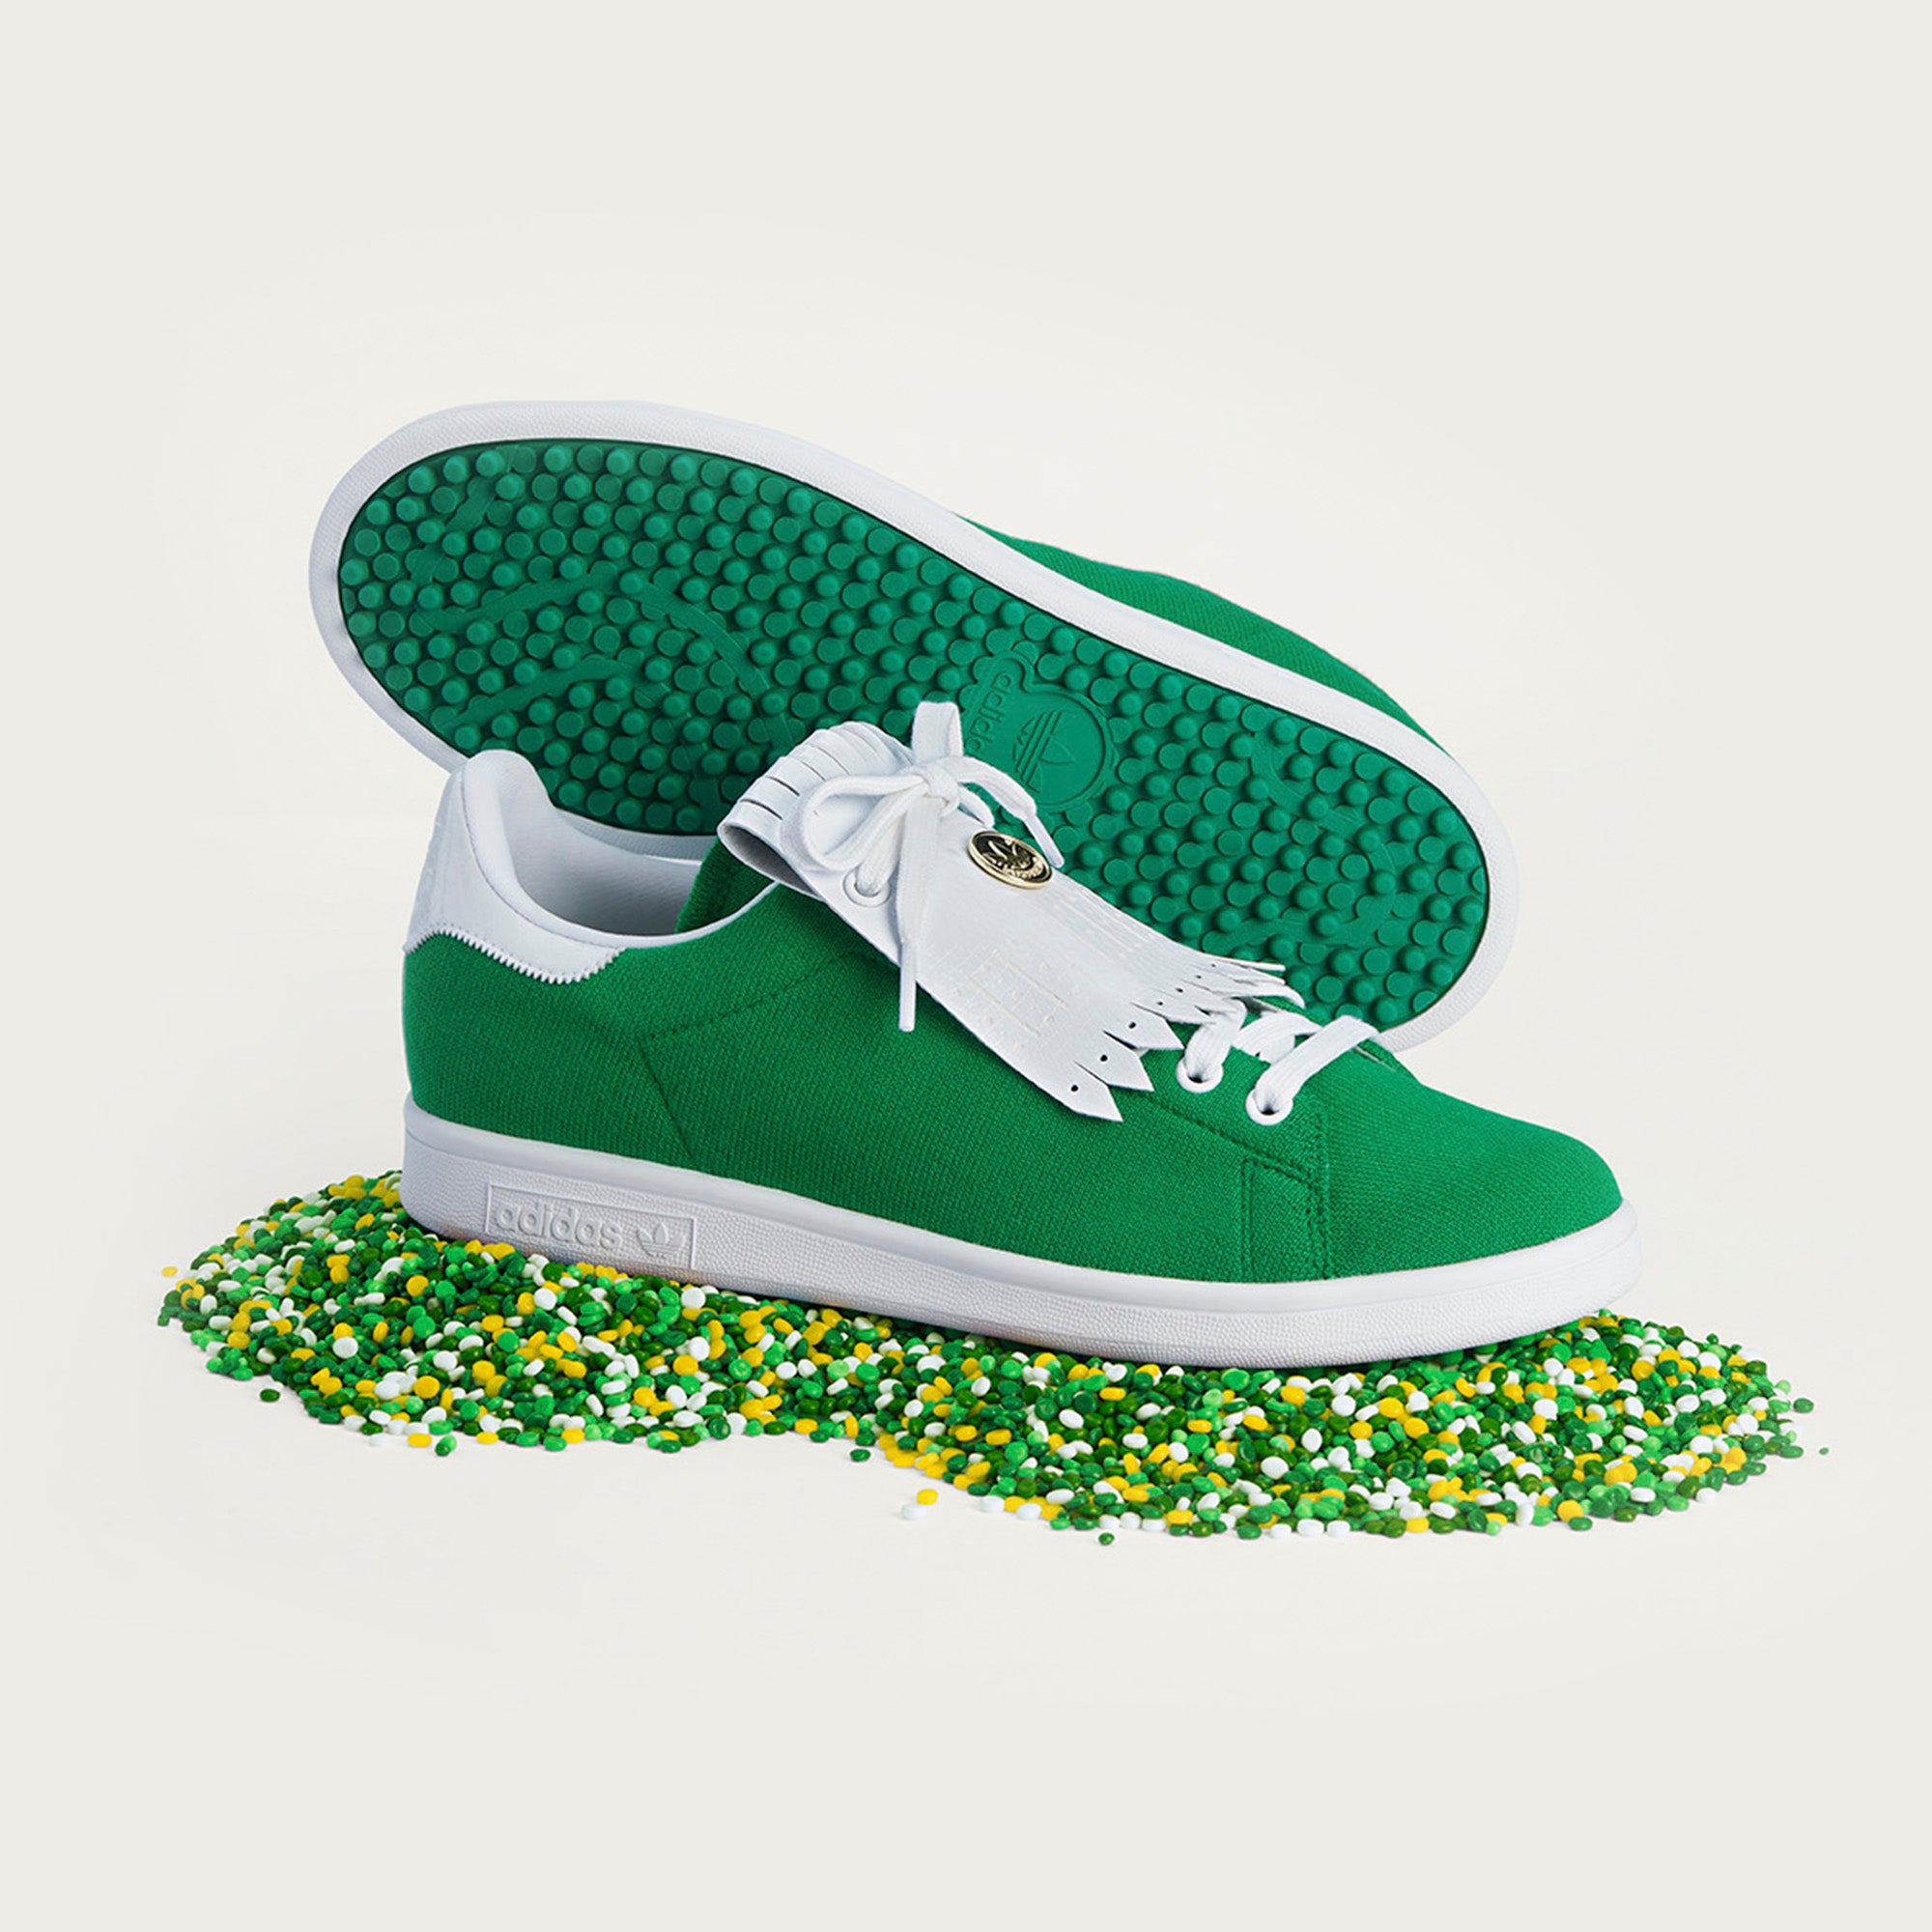 Court meets Course — Adidas Golf with Stan Smith card image